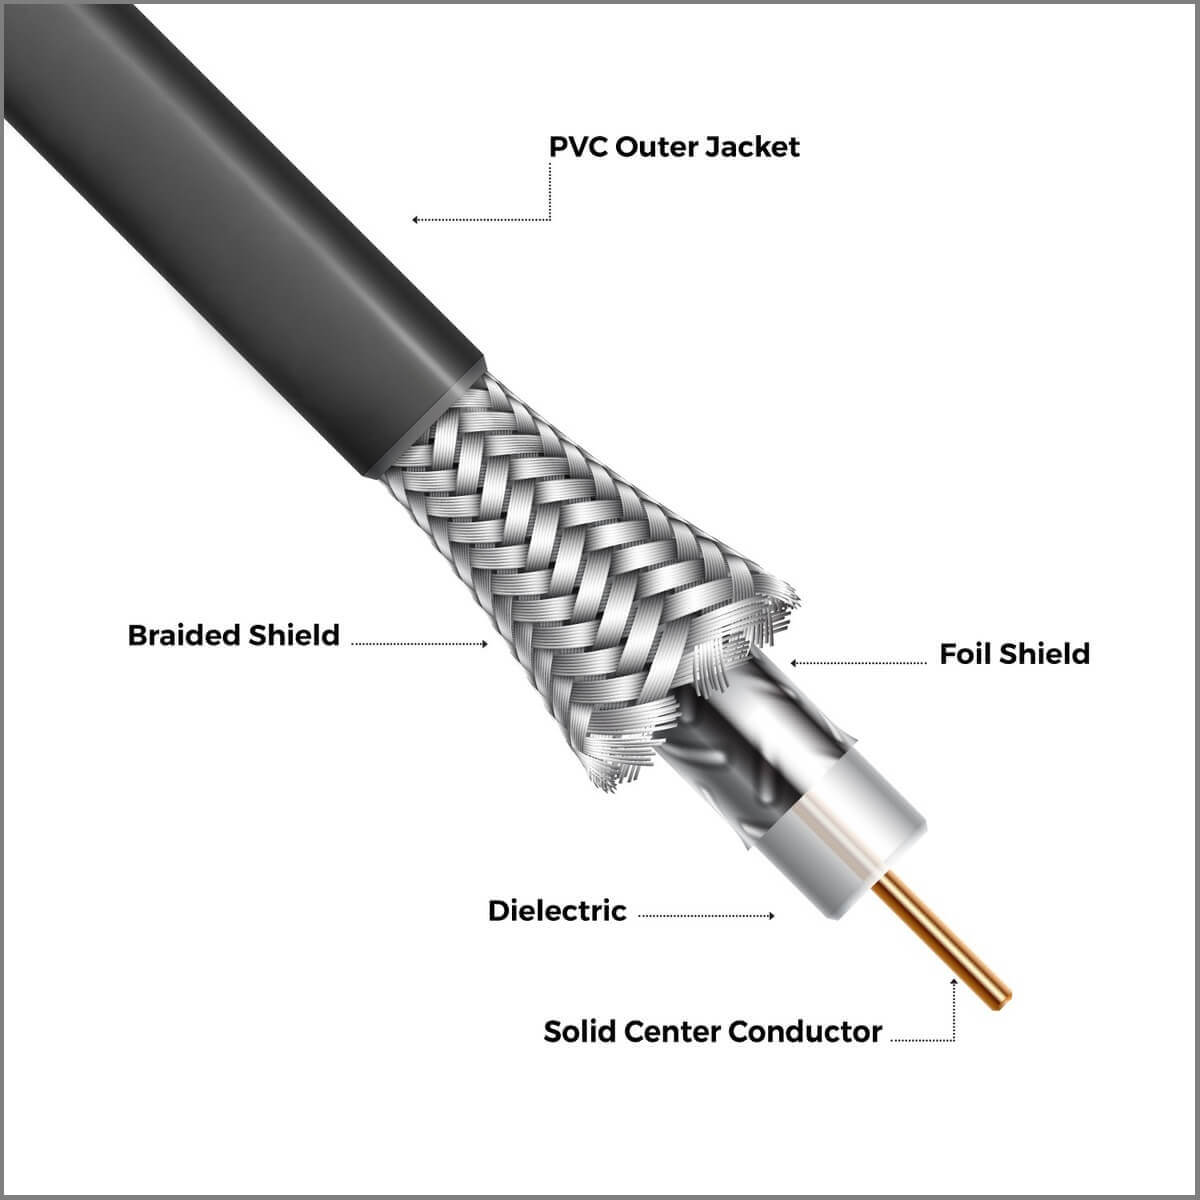 Shop of Components for Covering Outdoor Cables